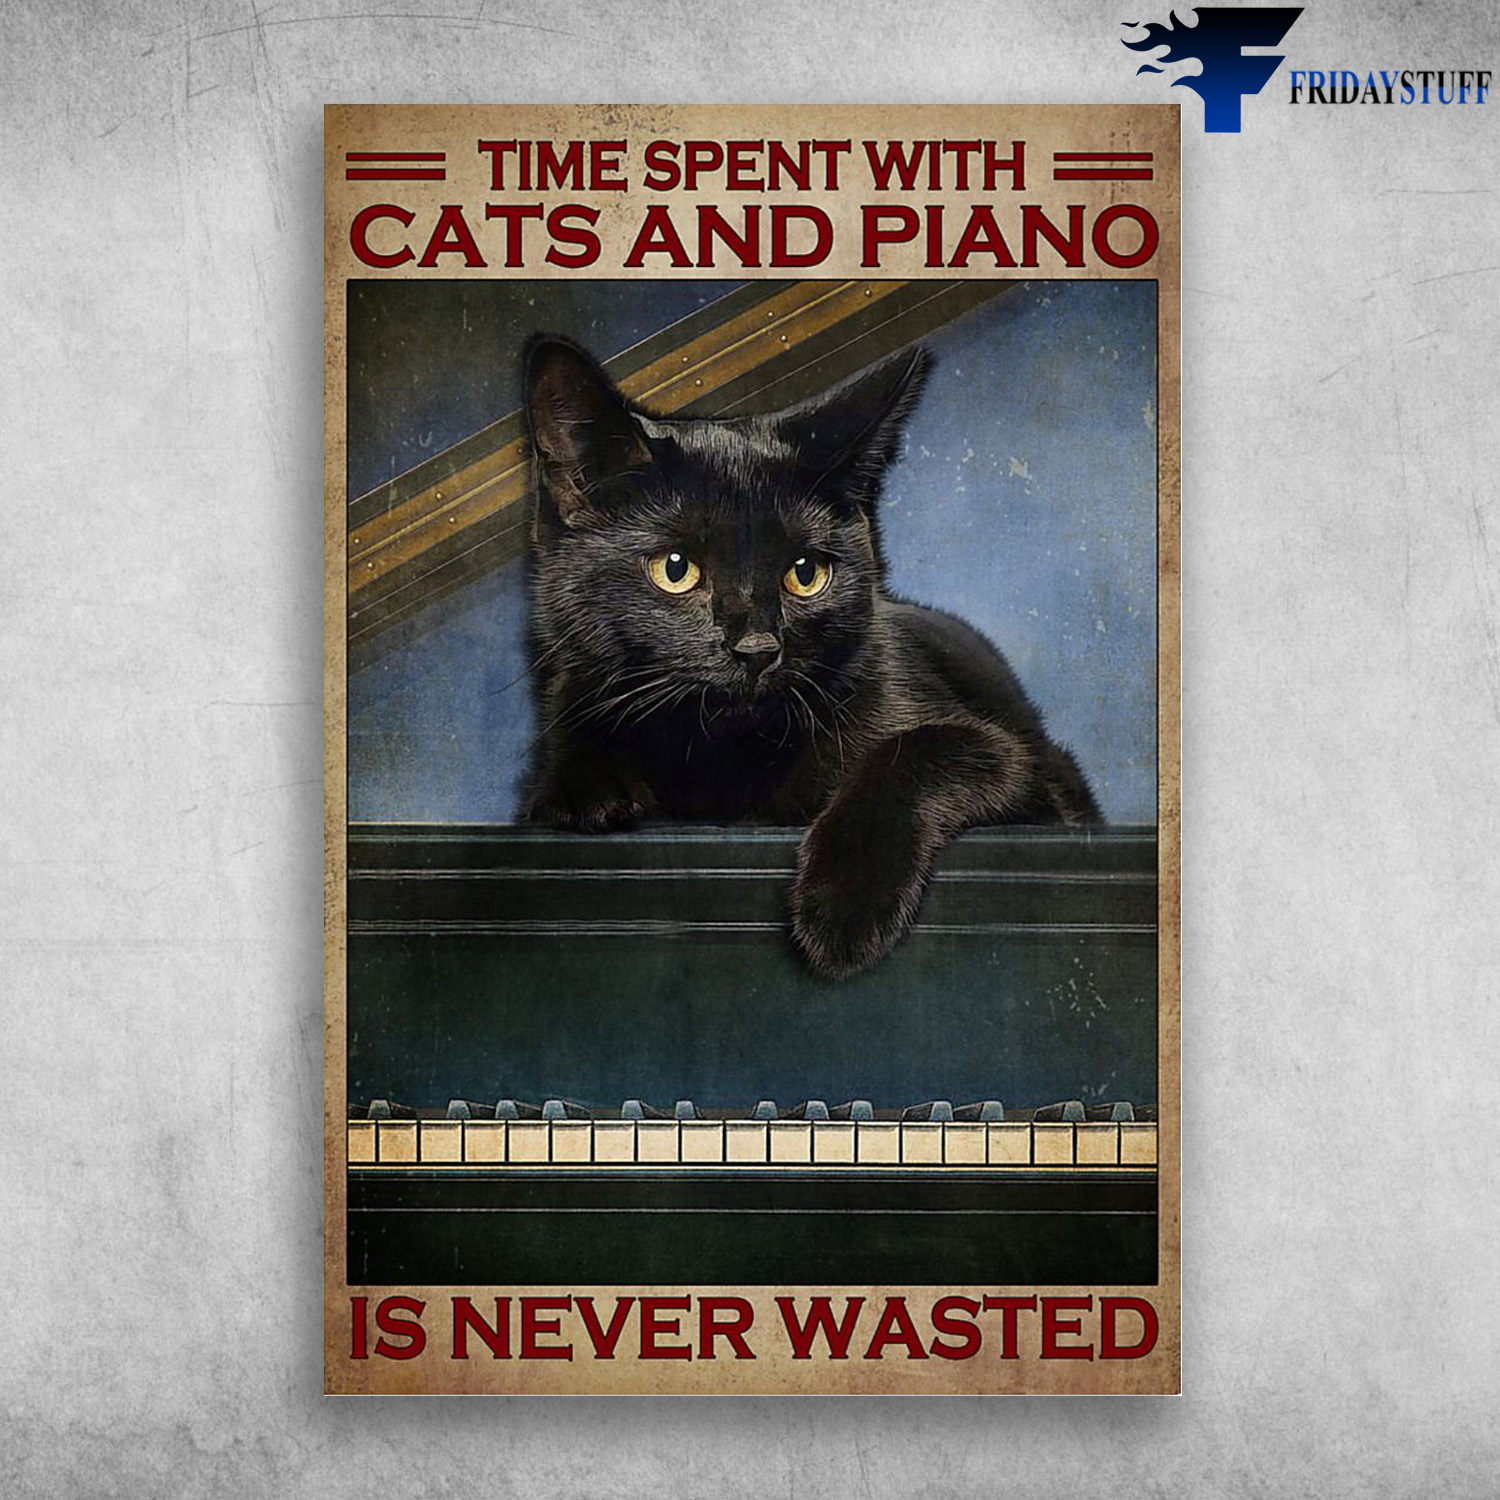 Black Cat In The Piano - Time Spent With Cats And Piano Is Never Wasted